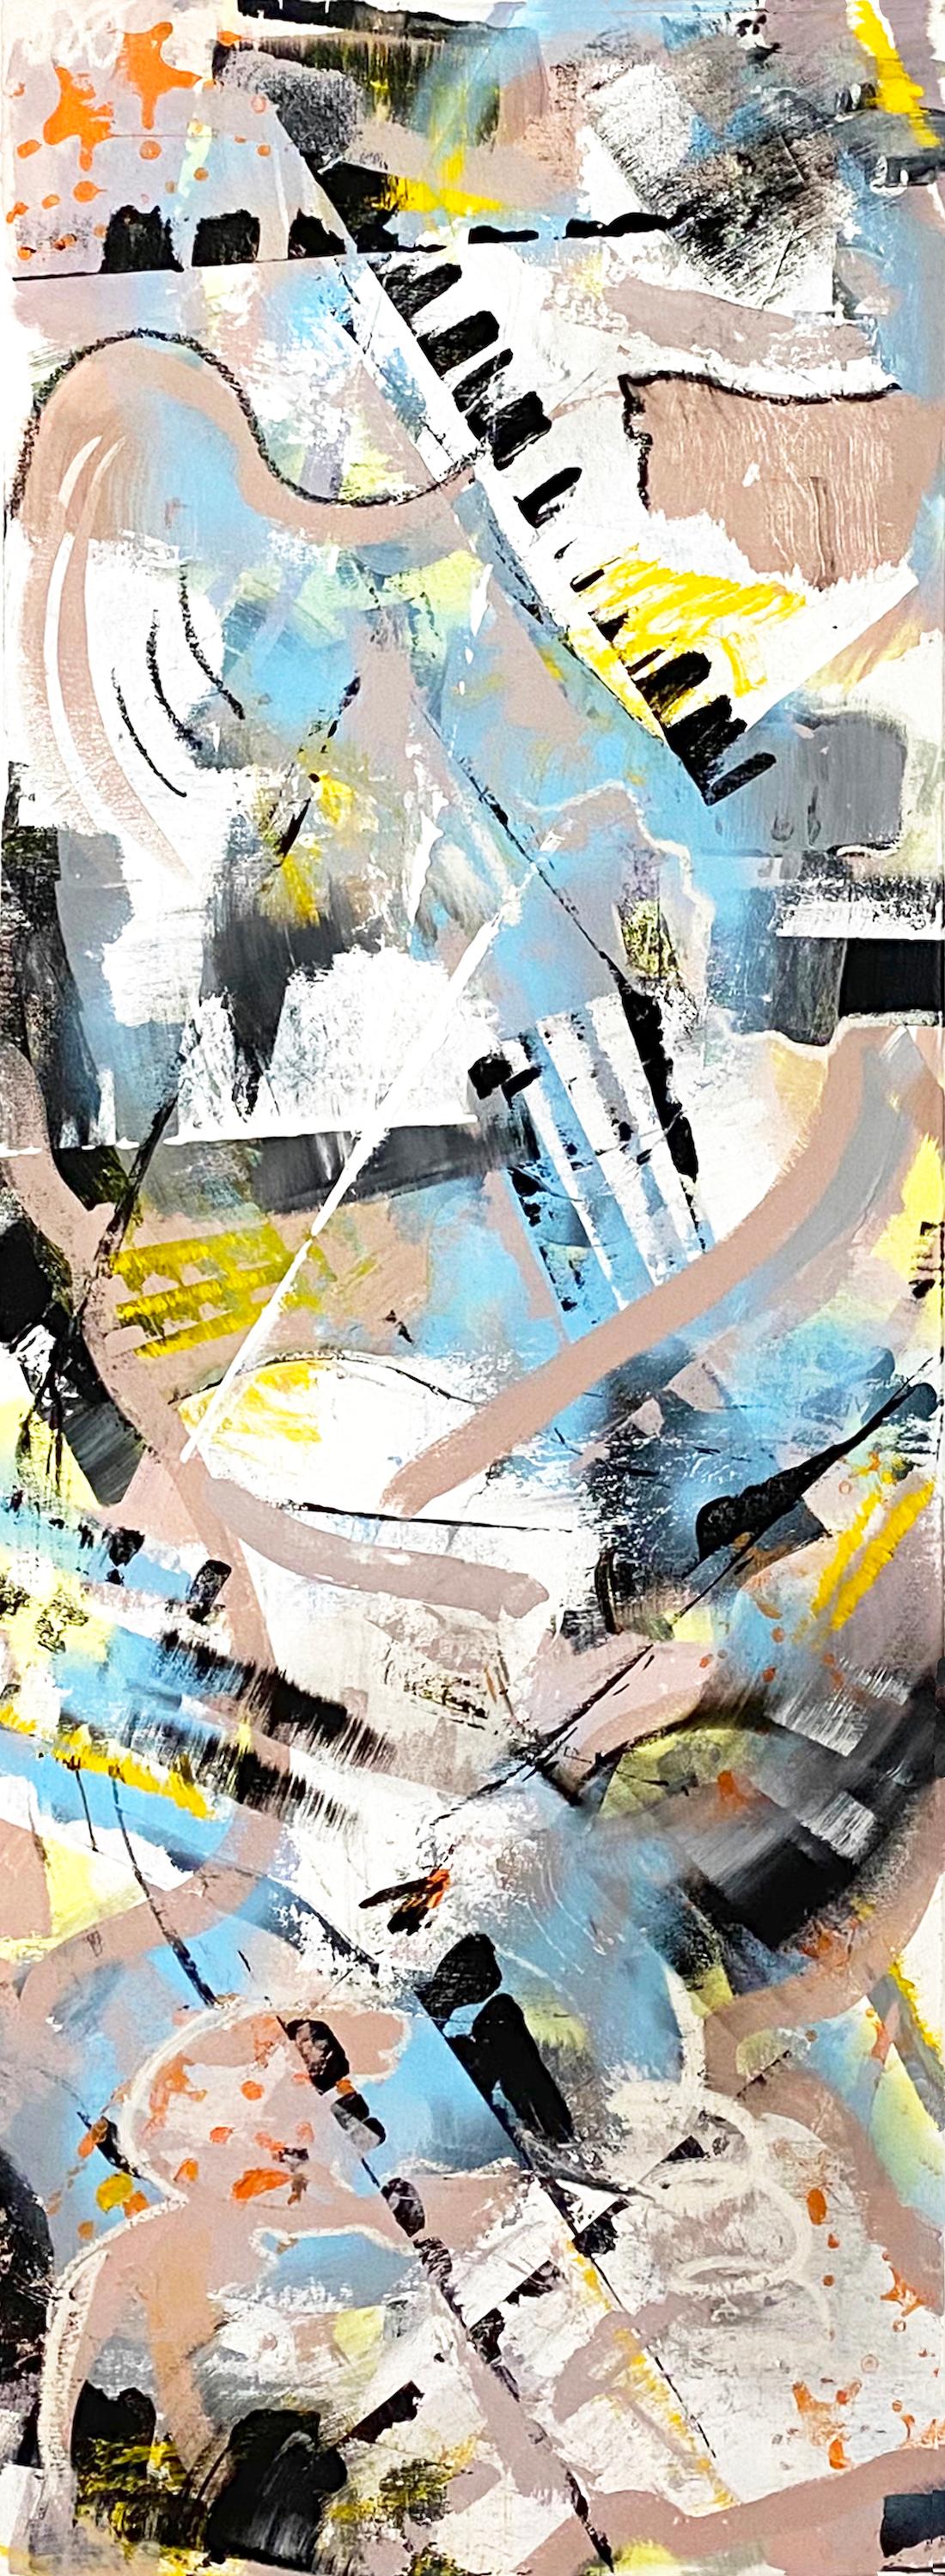 Joanne Handler Abstract Painting - Steppin Out